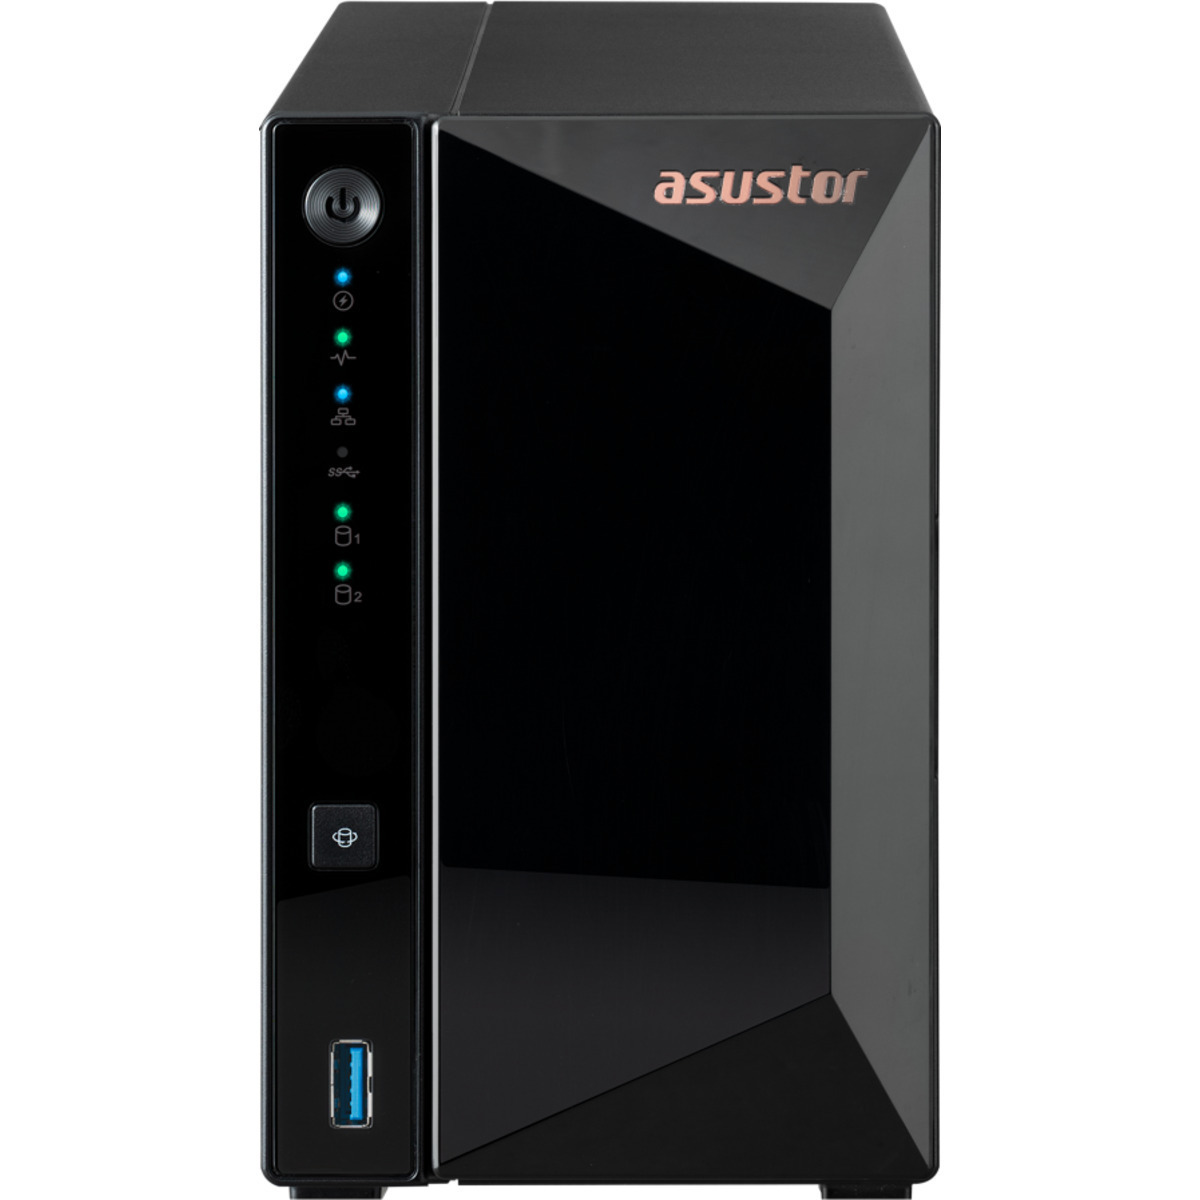 ASUSTOR DRIVESTOR 2 Pro AS3302T 8tb 2-Bay Desktop Personal / Basic Home / Small Office NAS - Network Attached Storage Device 2x4tb Toshiba MN Series MN08ADA400E 3.5 7200rpm SATA 6Gb/s HDD NAS Class Drives Installed - Burn-In Tested - ON SALE DRIVESTOR 2 Pro AS3302T